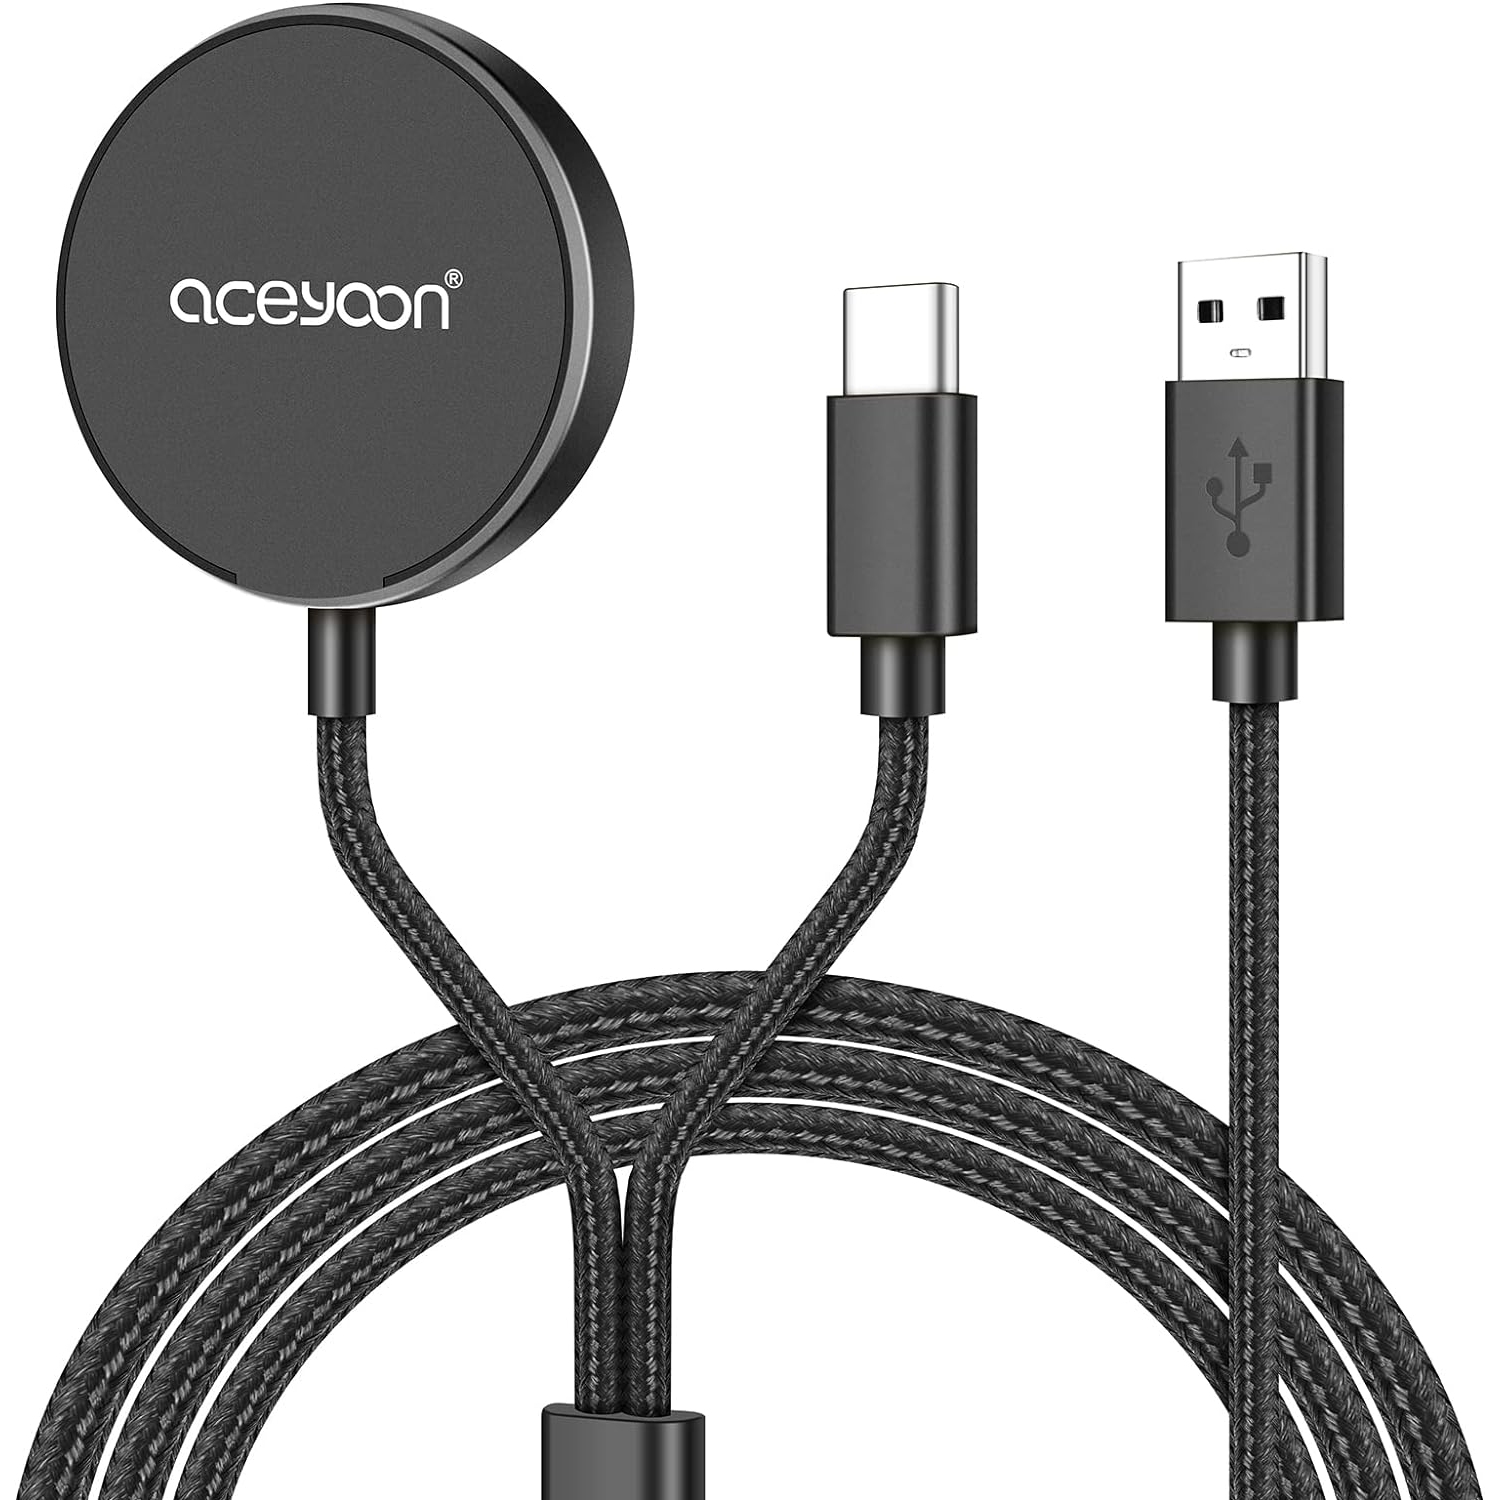 Watch Charger Cable Compatible for Samsung Galaxy Watch (1.5M/5FT 2 in 1 Dock)